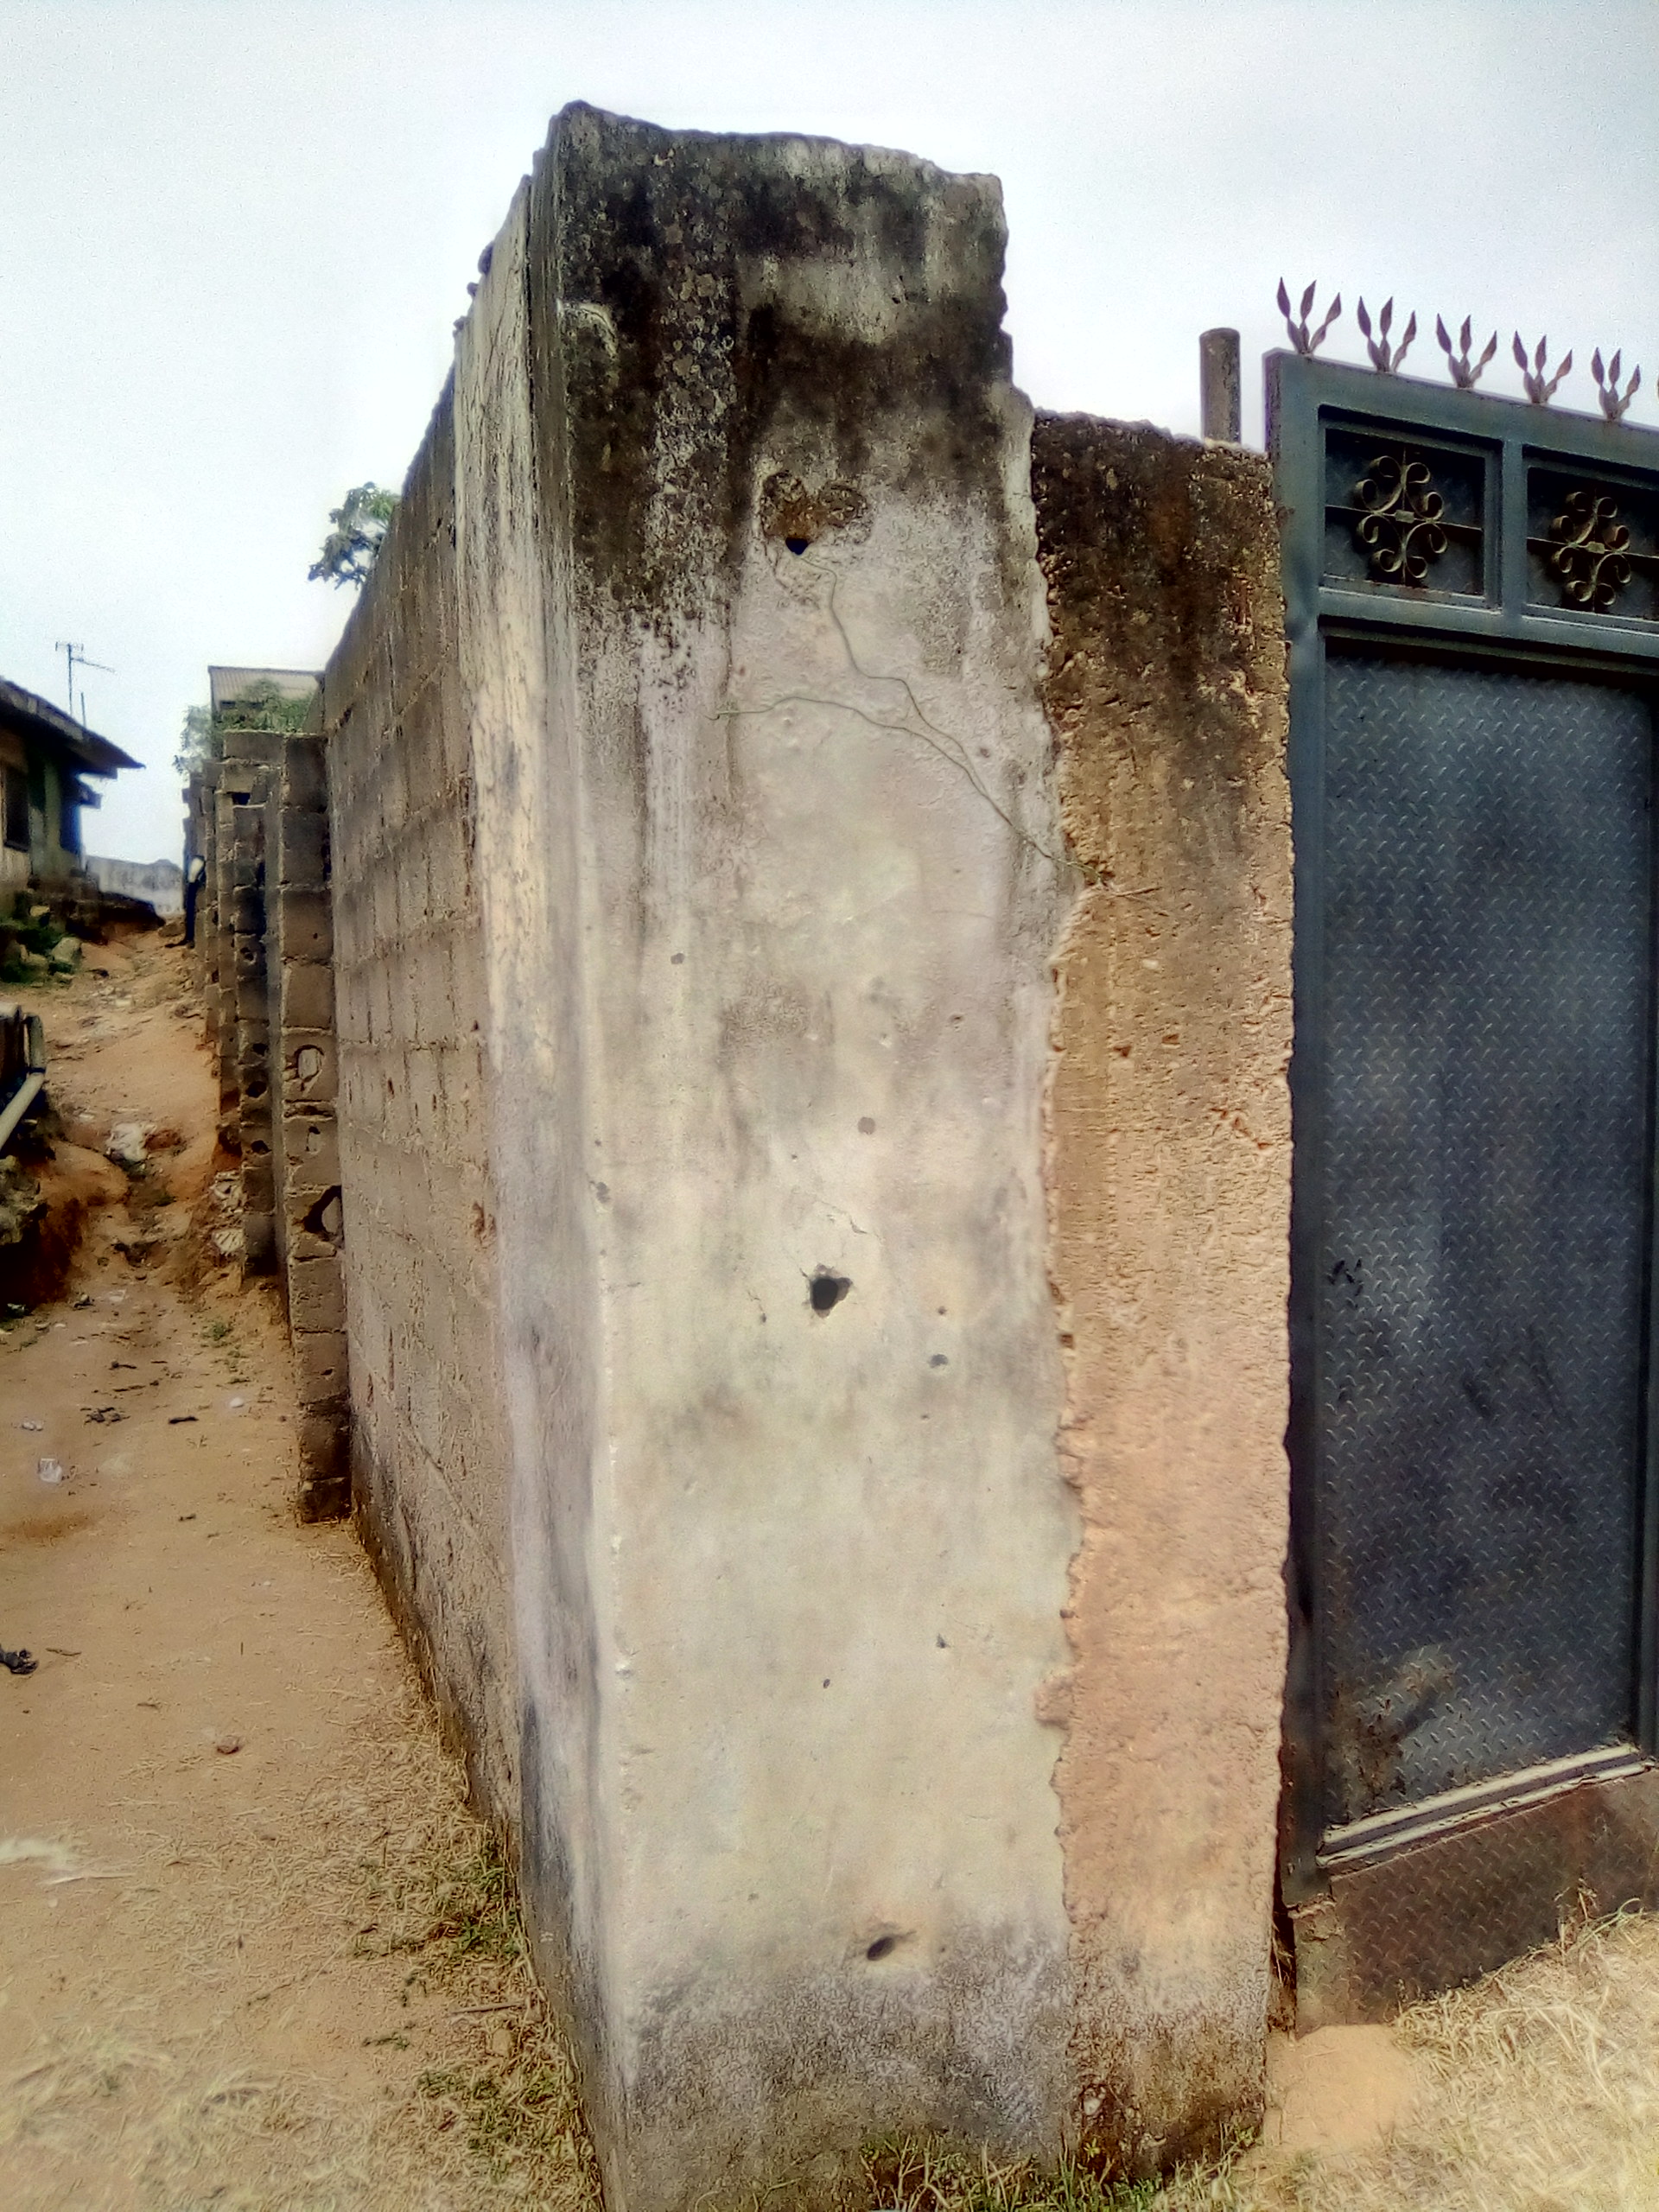 Uncompleted building on a full plot of land